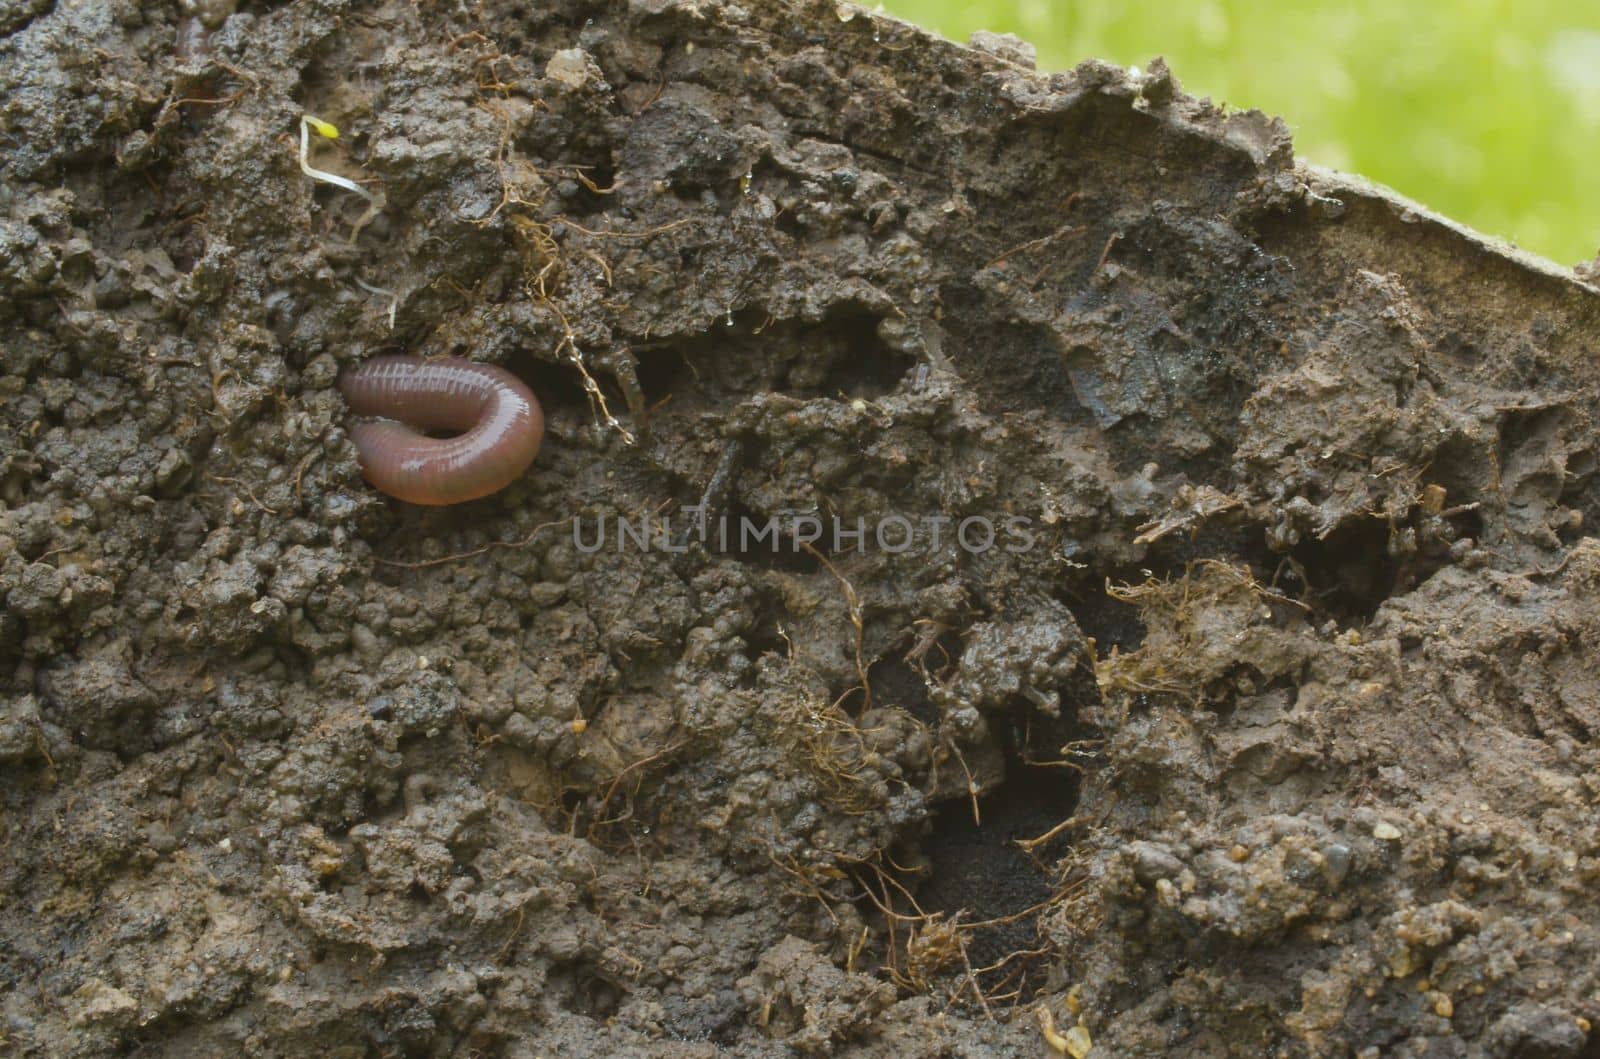 Worm crawling in freshly dug up soil by Alize